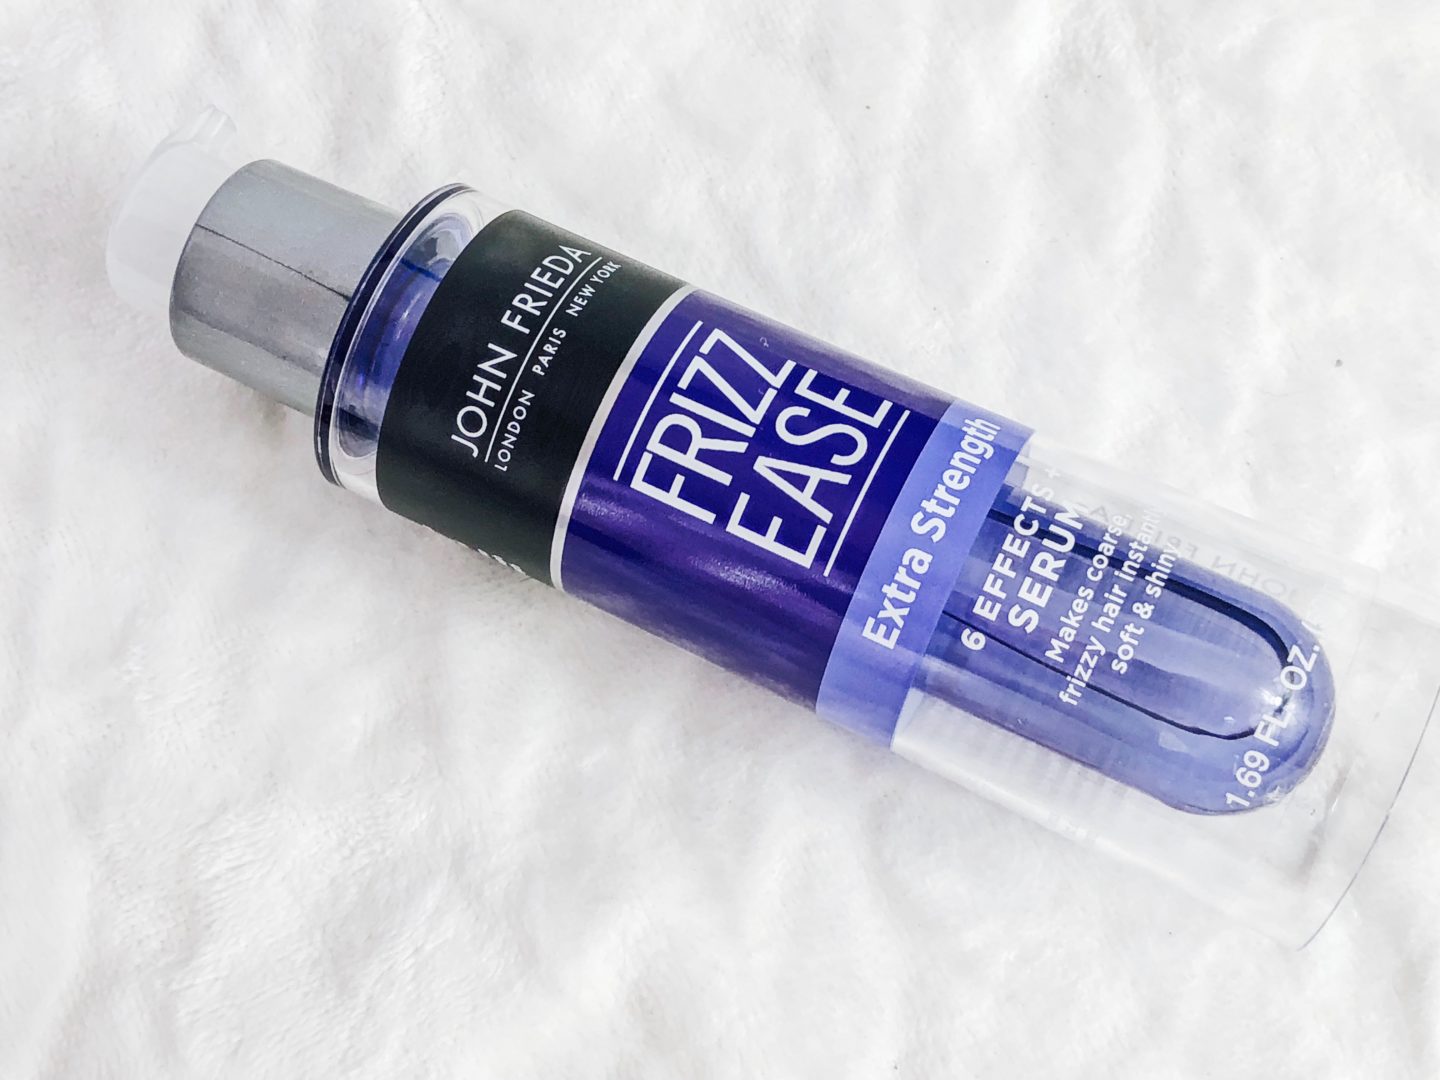 Frizz Ease Leave-in Conditioning Spray